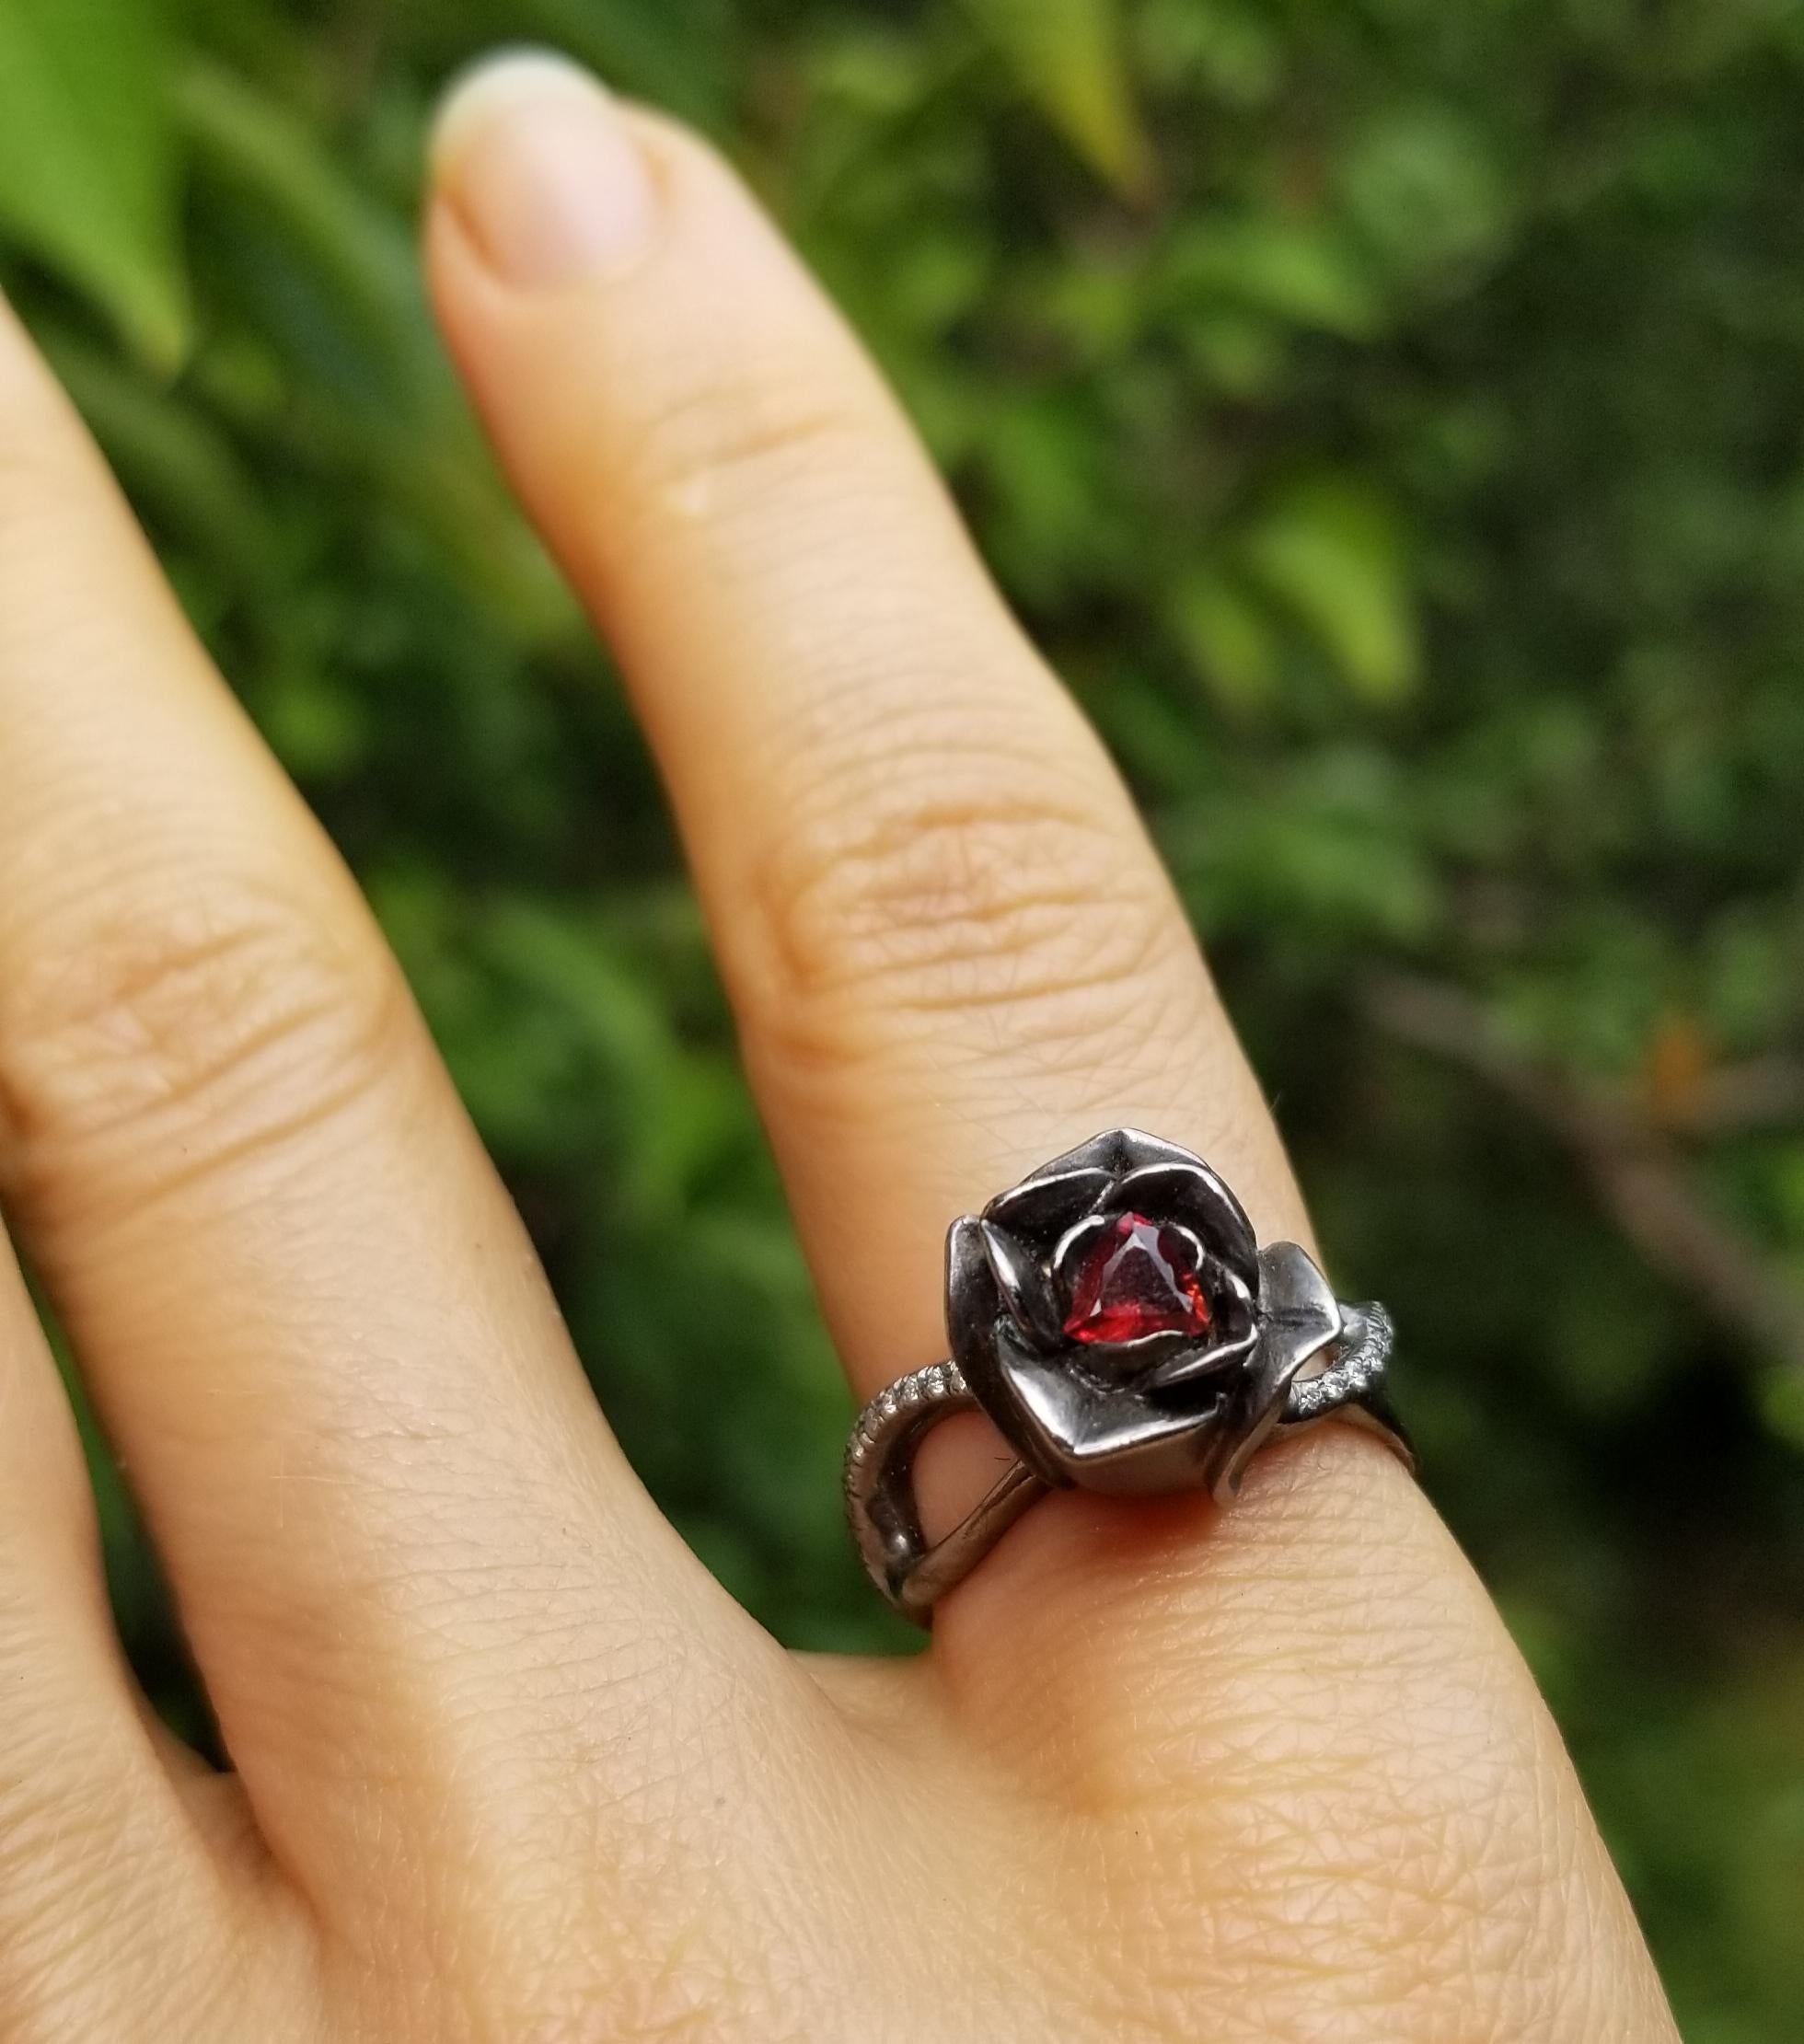 A symbol of rebirth and hope, this stunning black rose ring was hand-carved in wax and cast in Sterling silver, then set with a perfect blood-red trillion garnet in the center.
White diamonds frame the flower on either side and cascade down the